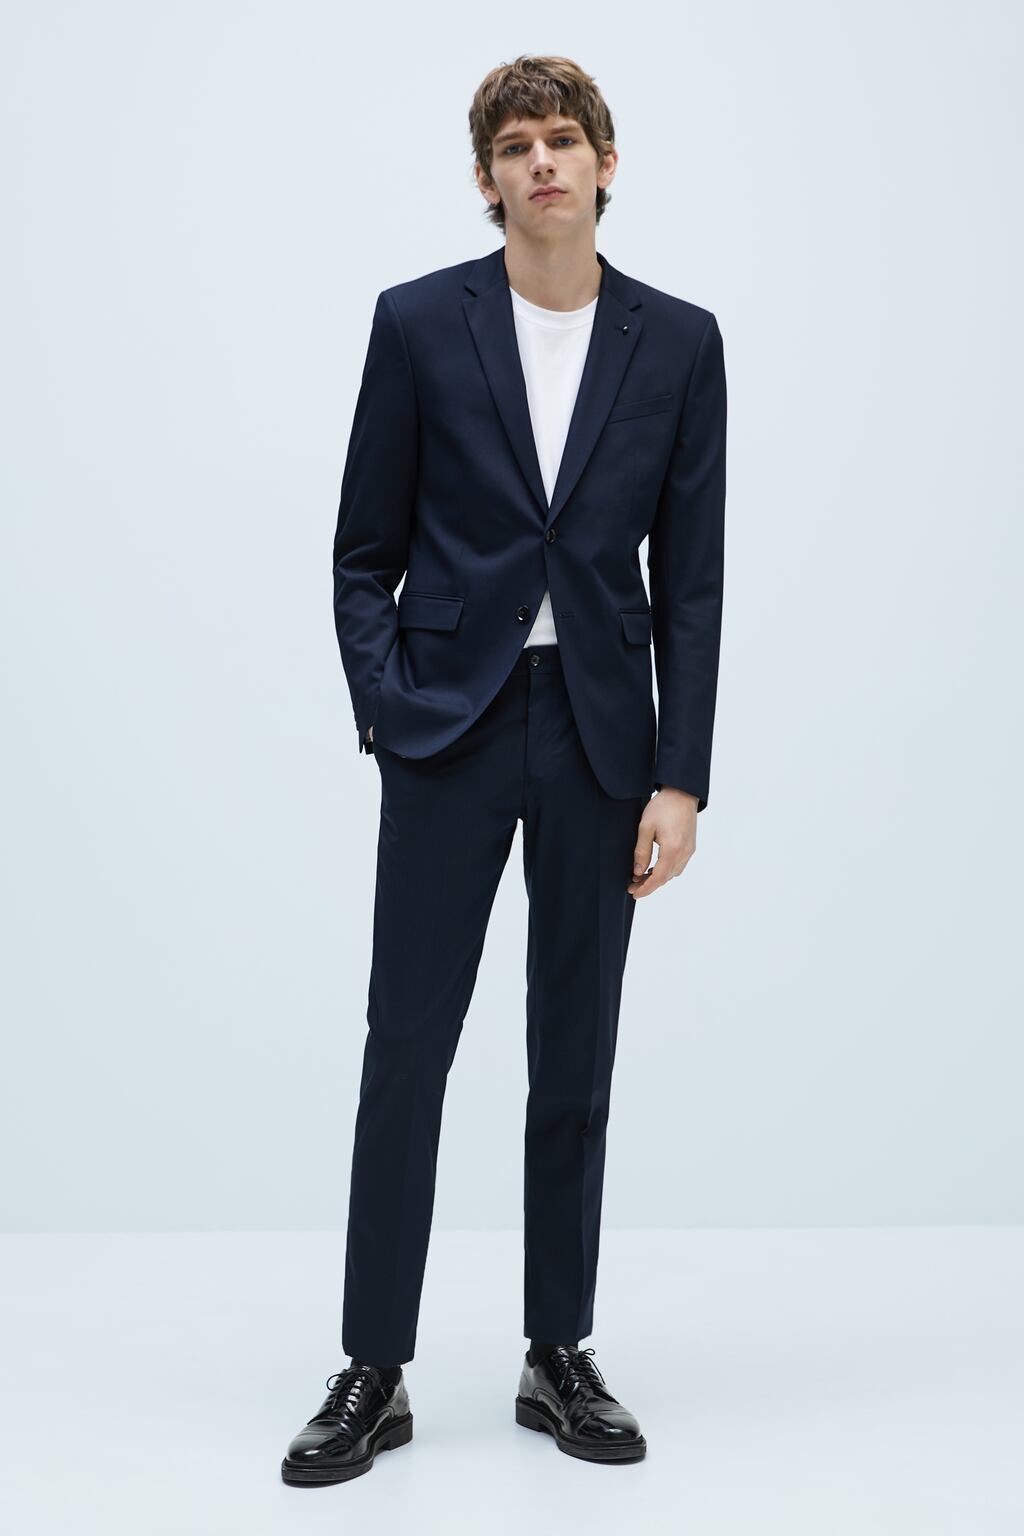 Zara Stretch Sheen Suit Jacket |Stylish Gift For Dad Presents That Are Budget-Friendly|gift for dad